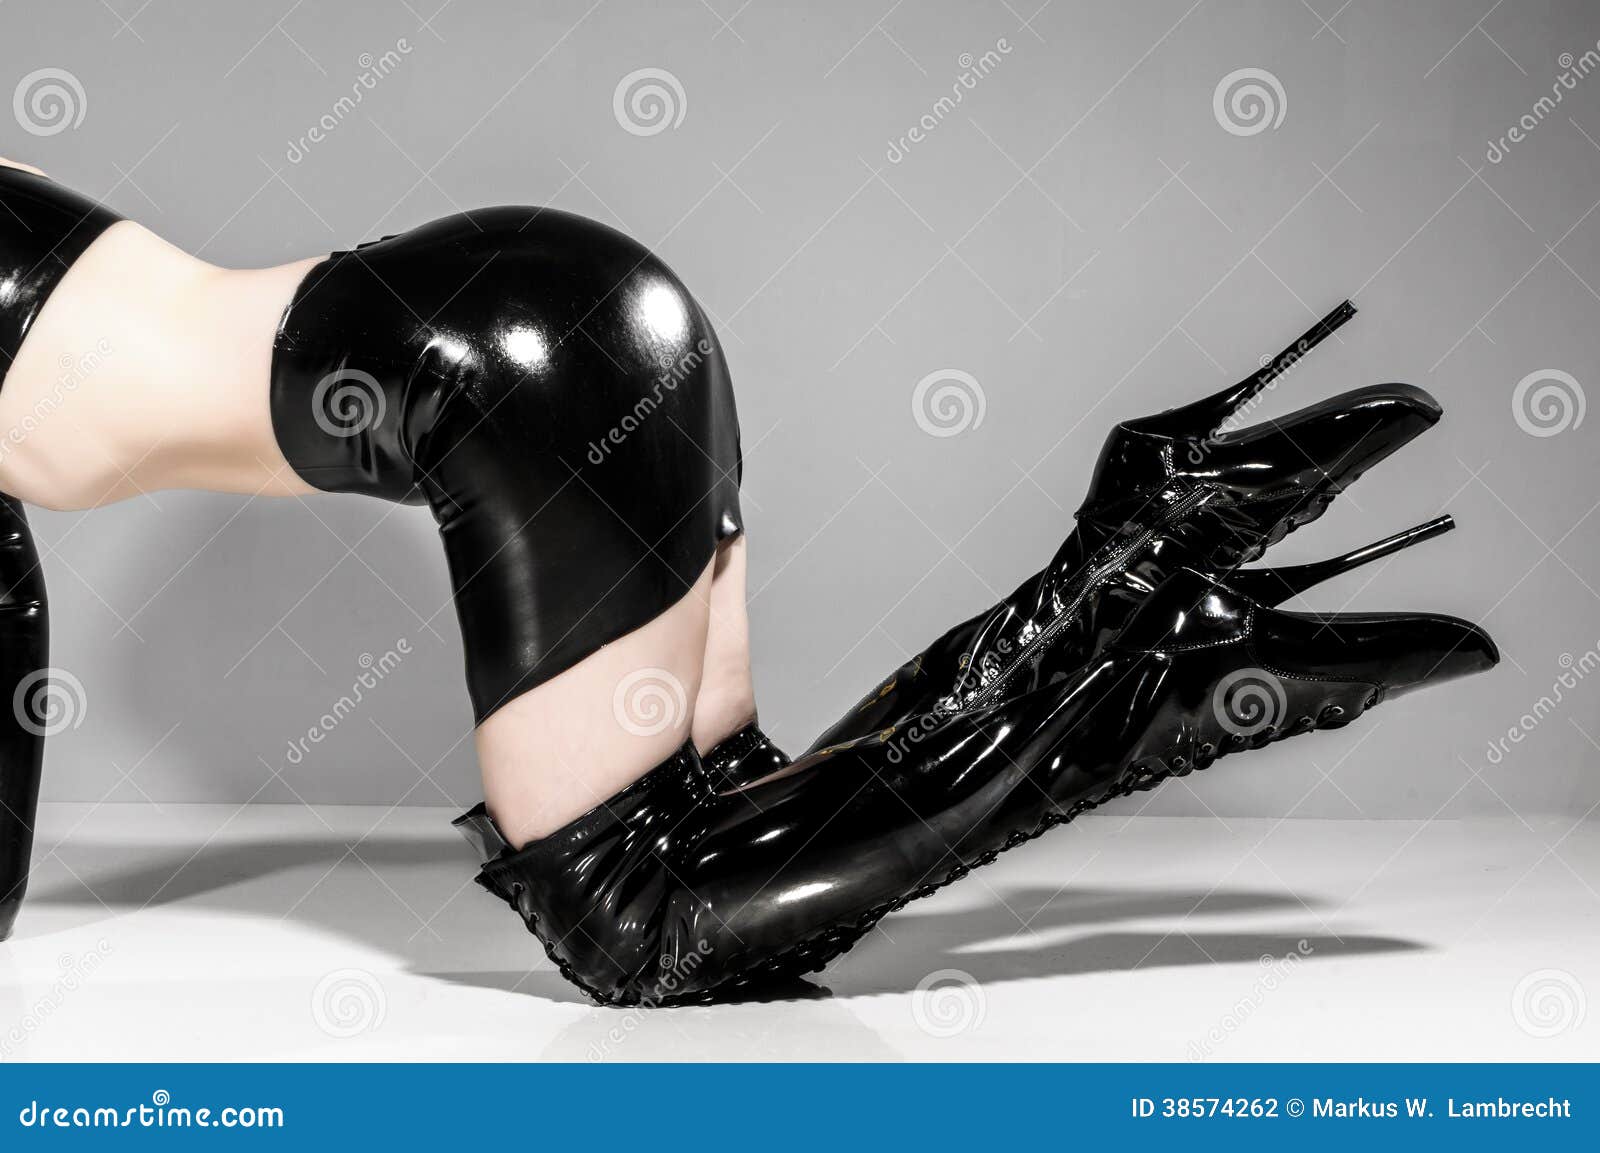 in ballet Boot stock photo. of female 38574262